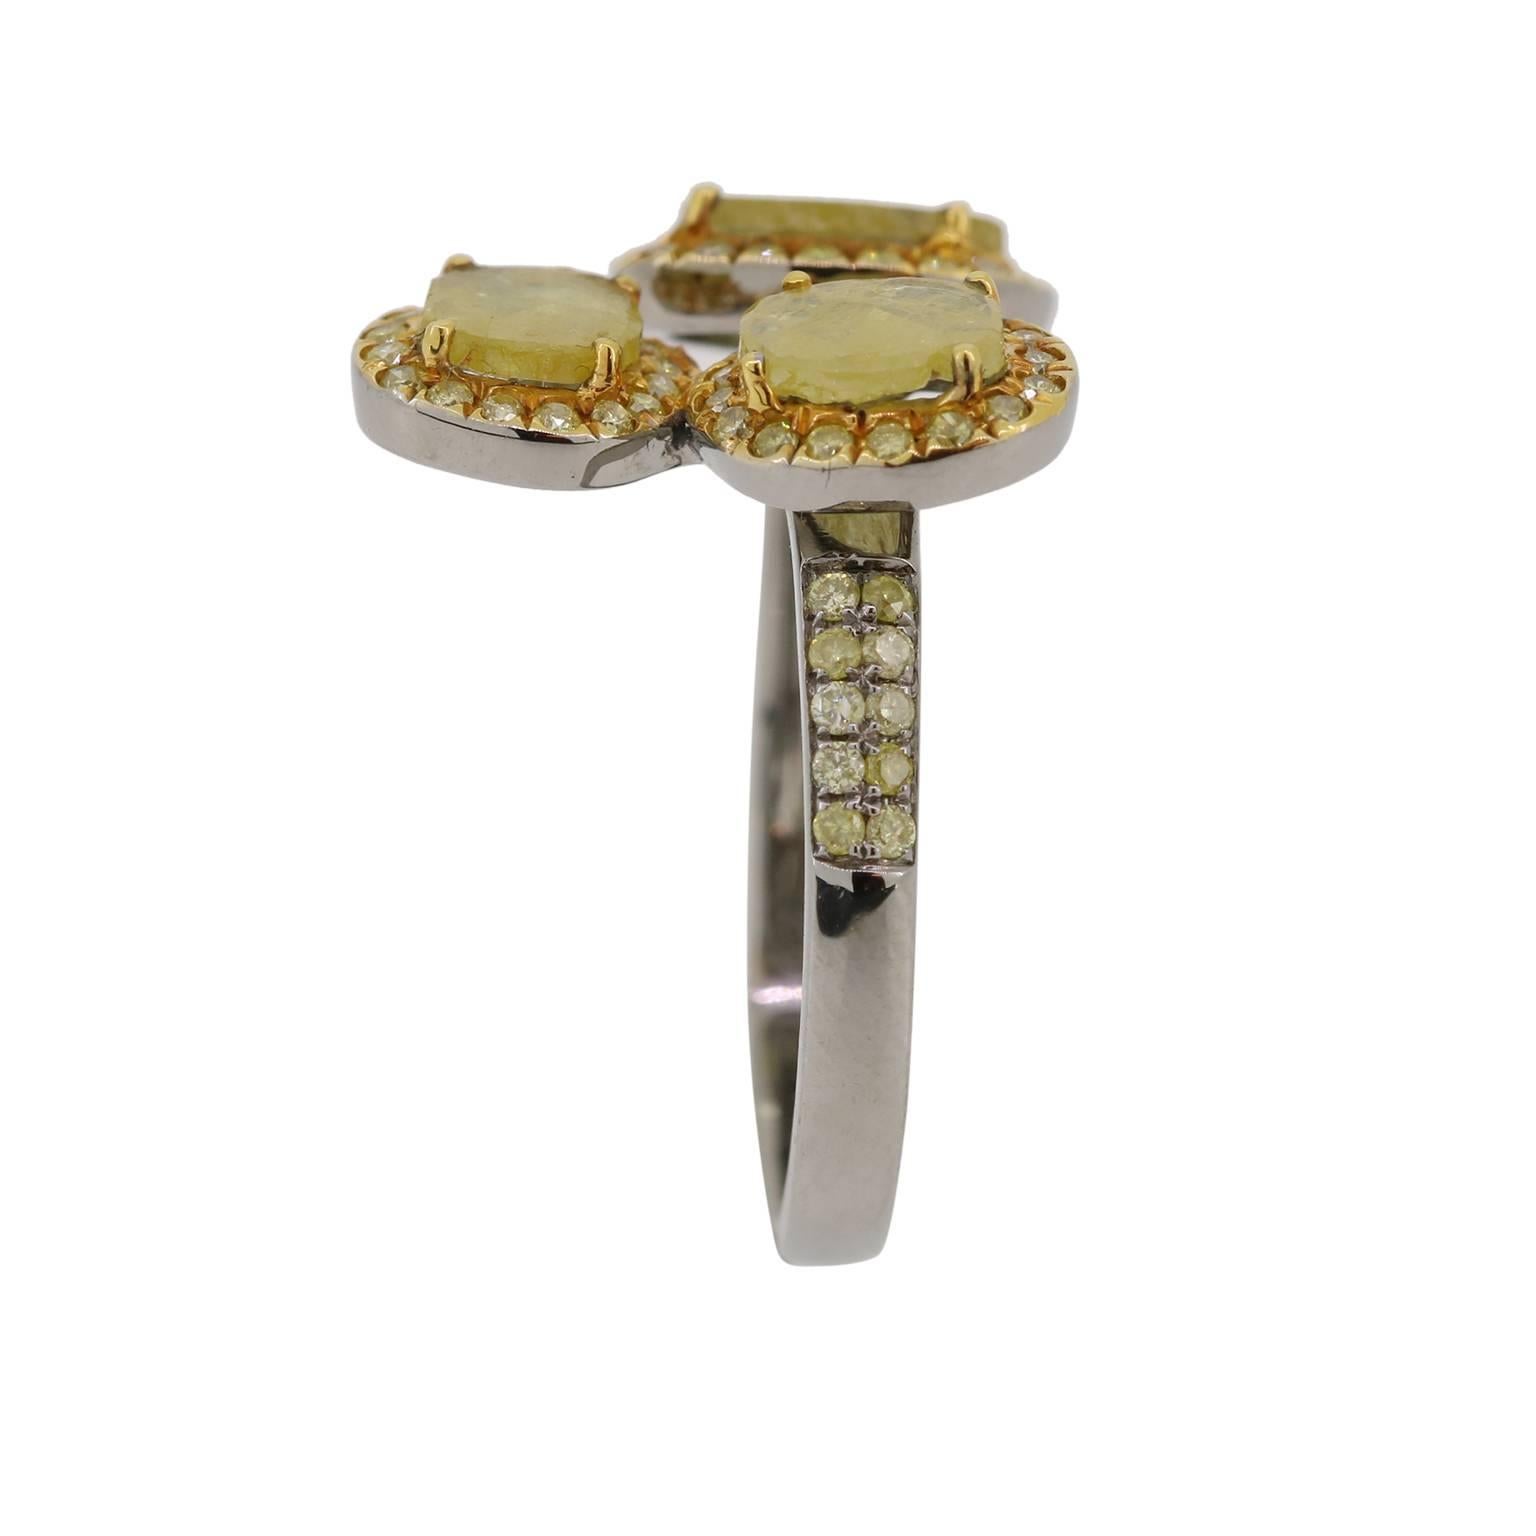 Triple the fun with this open band 3 sliced yellow diamond ring with yellow diamonds halos around each slice.  The yellow diamond pave continues mid way down the ring shank.

Size 7, Please contact if sizing is necessary